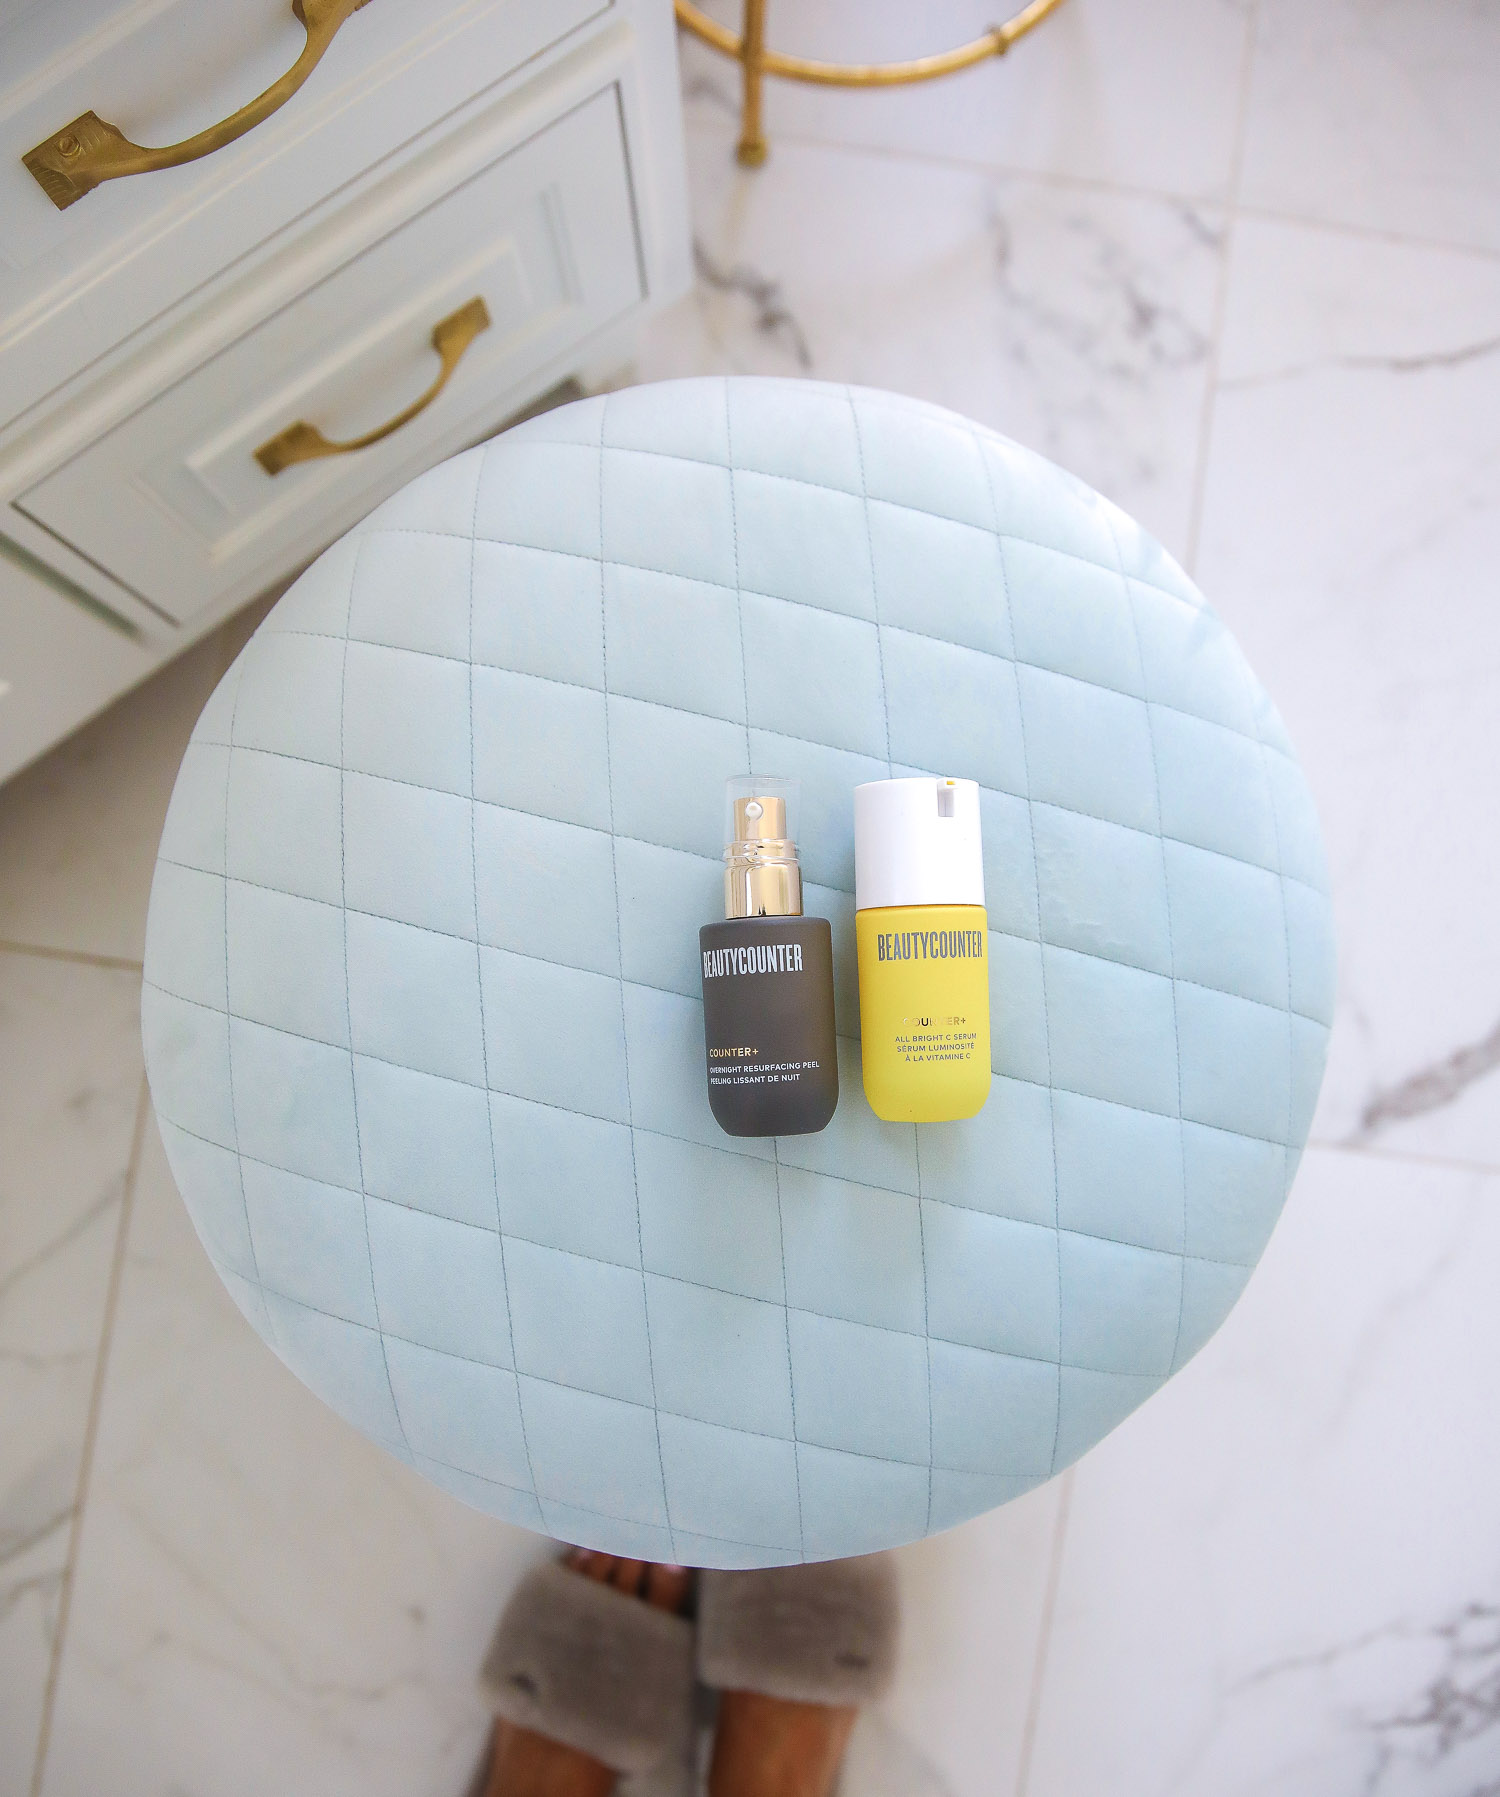 beauty counter review vitamin C, Beauty Counter Sephora overnight resurfacing gel, emily ann gemma | Beautycounter Products by popular US beauty blog, The Sweetest Thing: image of Beautycounter Counter+ Overnight Resurfacing Peel and Beautycounter Counter+ All Bright C Serum.